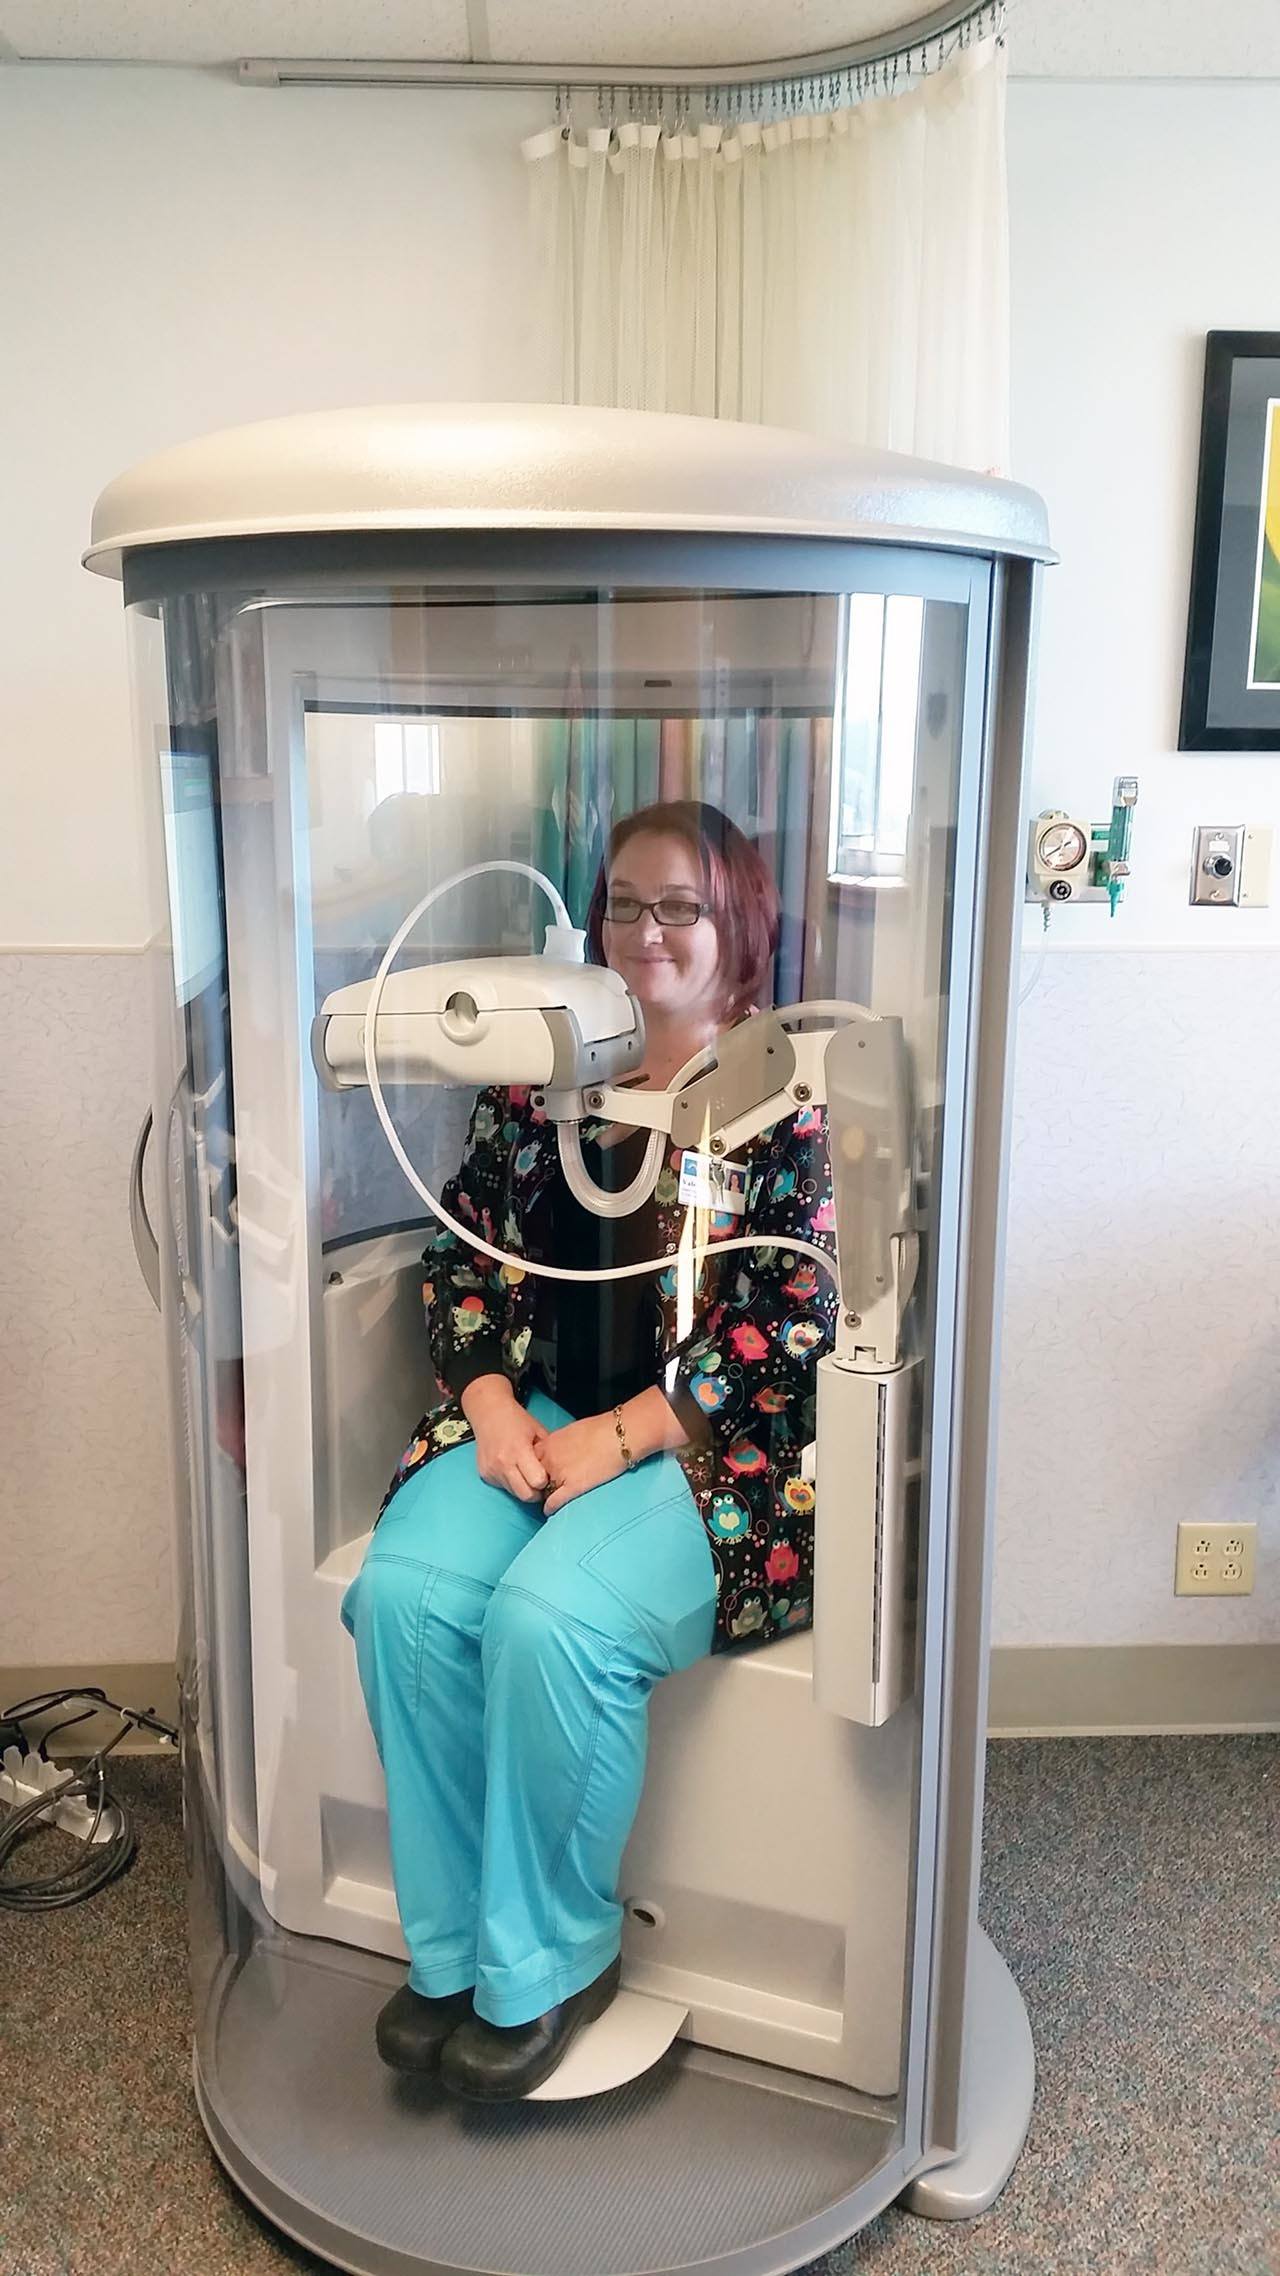 Terri Harber/The Daily World Valerie Norwood, the cardiopulmonary supervisor at Grays Harbor Community Hospital, sits inside the hospital’s new diagnostic body plethysmograph used for lung testing.